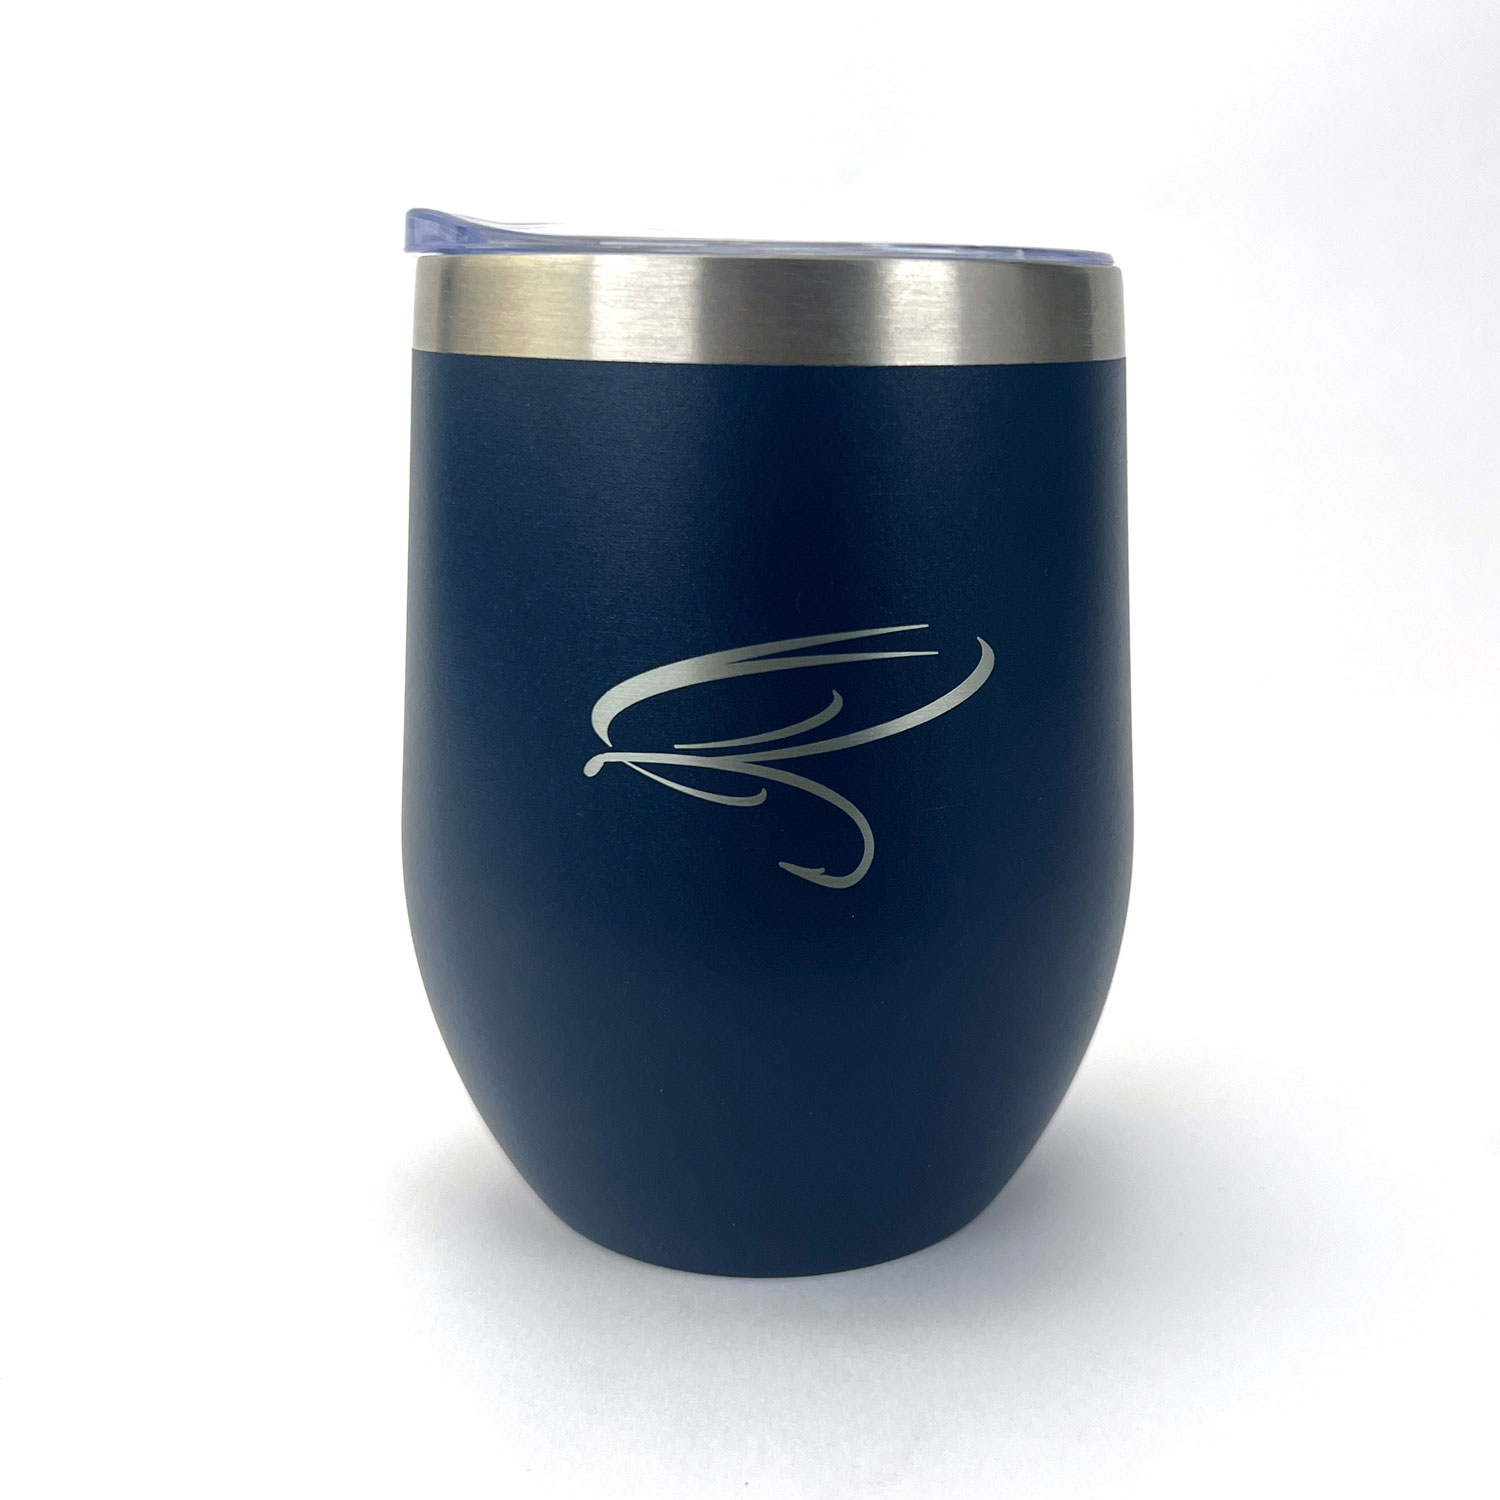 Stainless Steel Tumbler & Cup "Fly" 350 ml